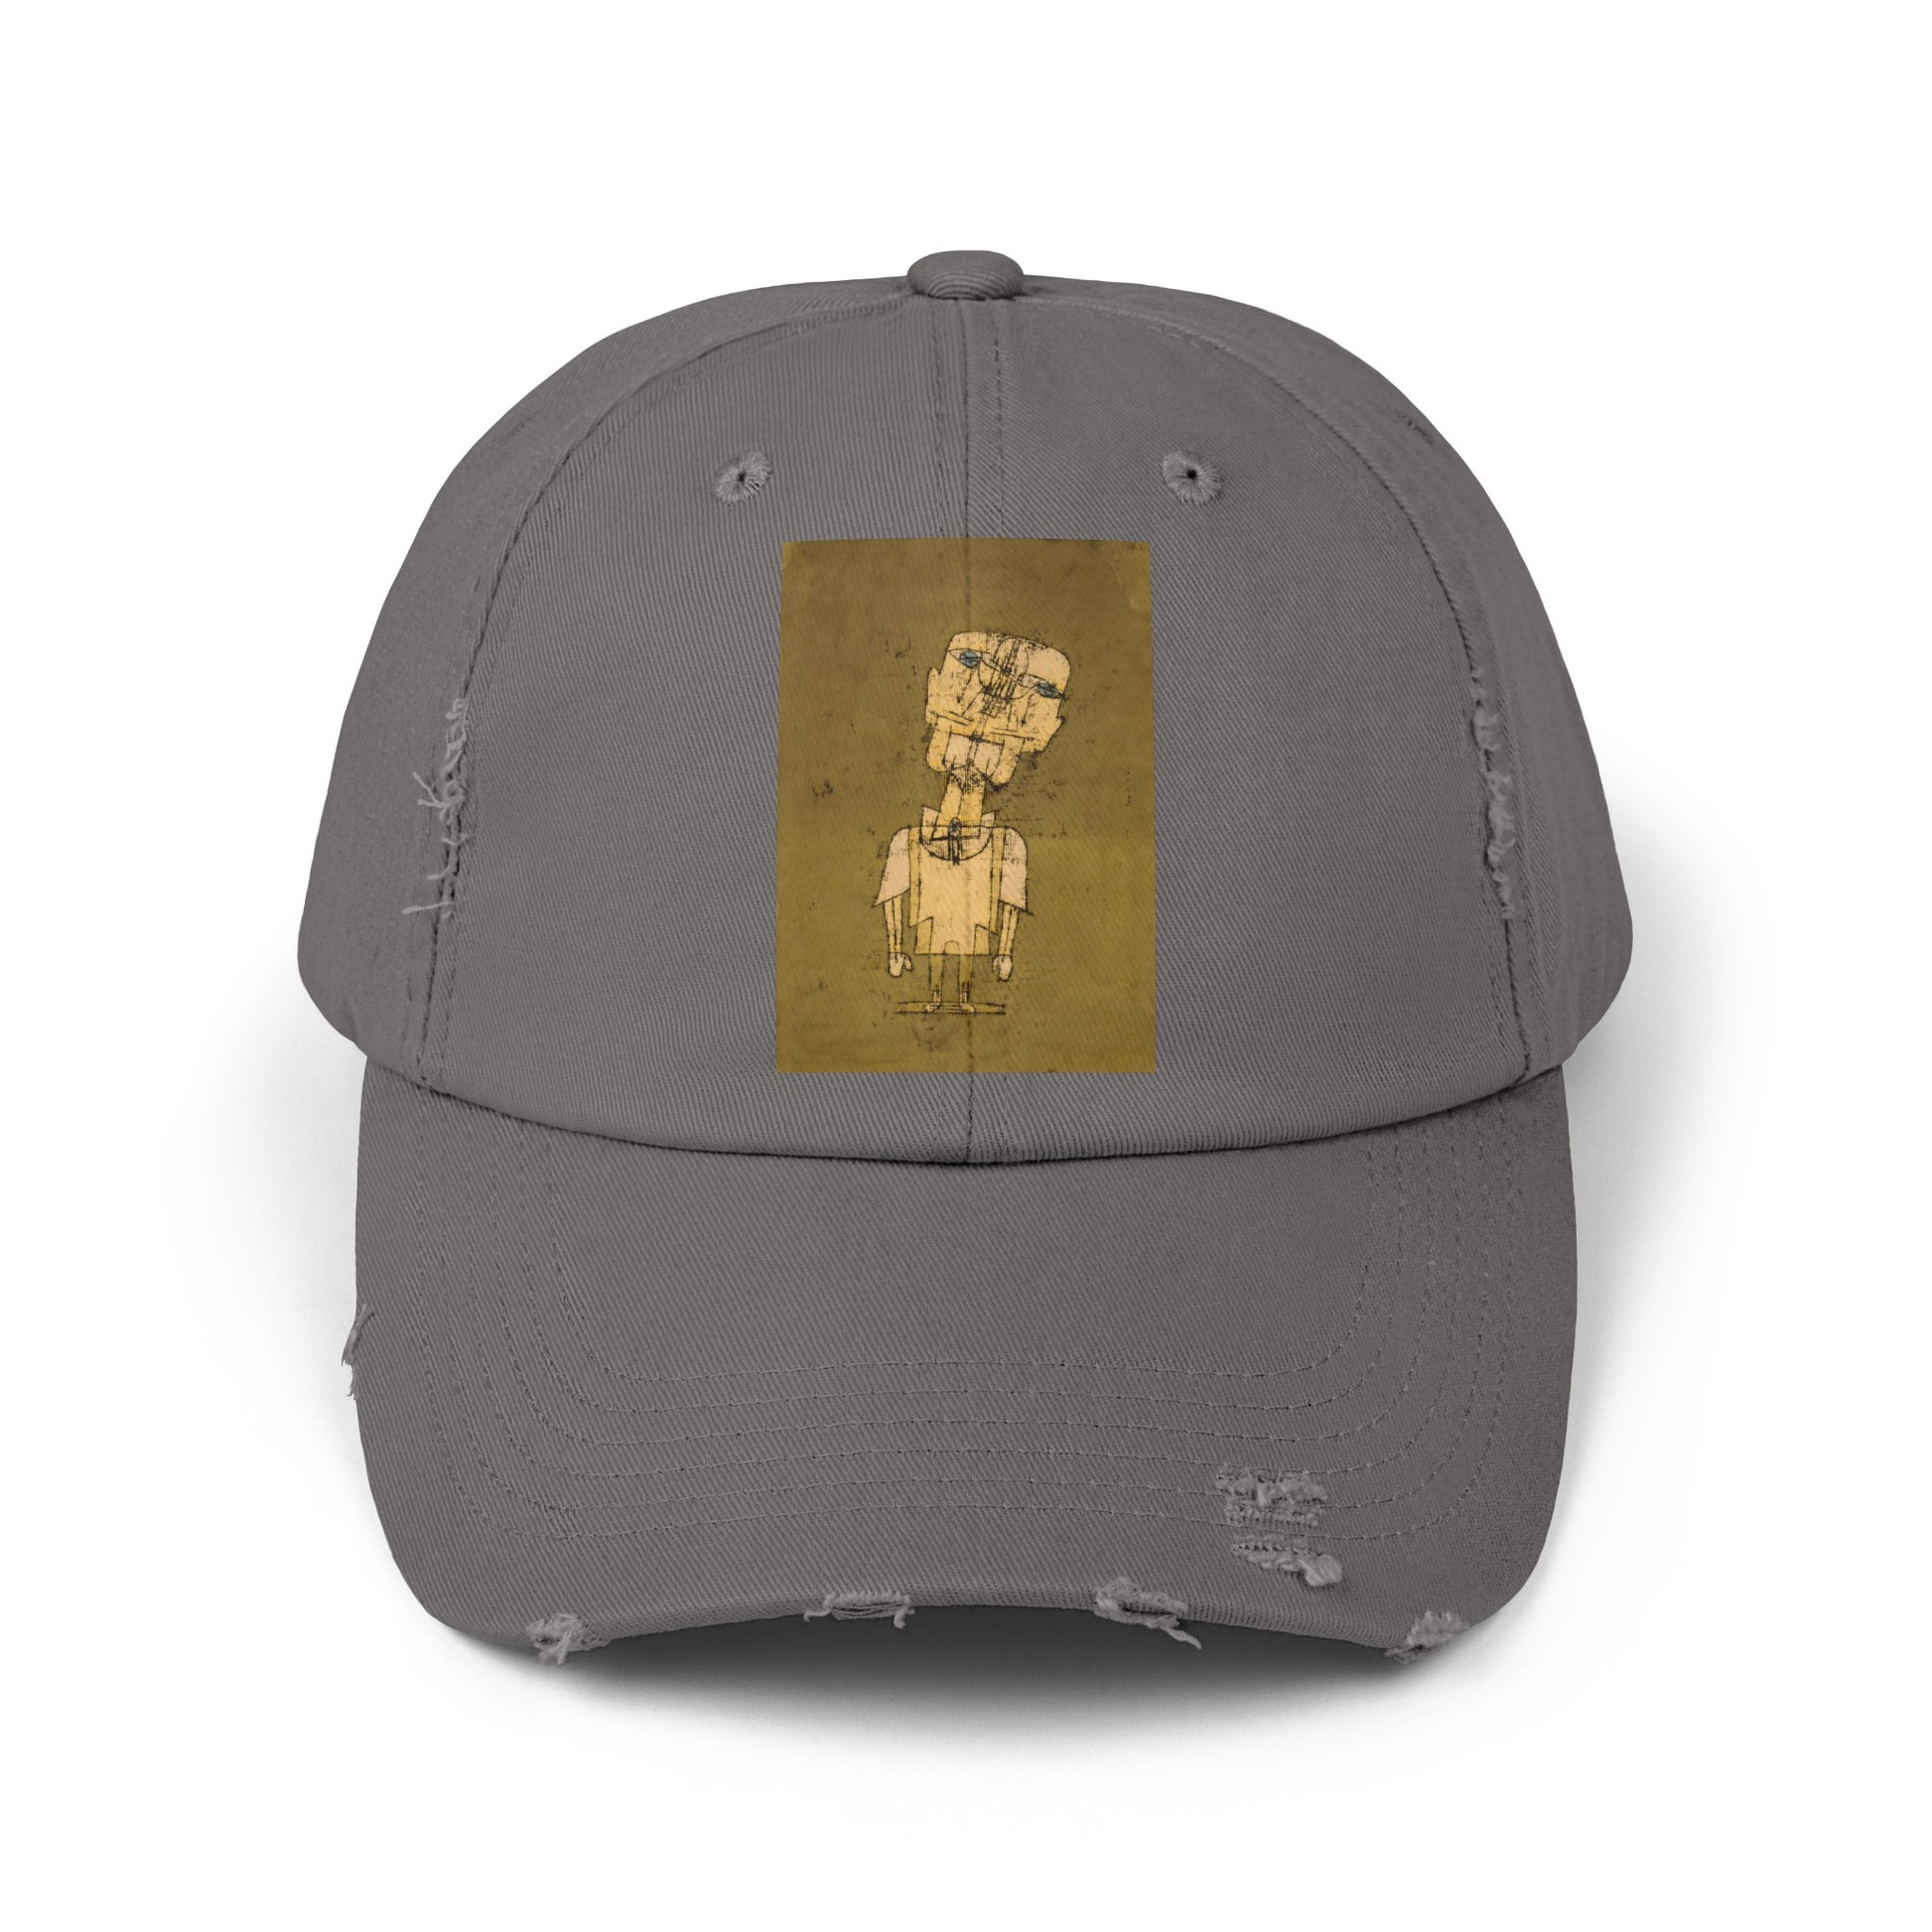 a baseball cap with a picture of a man on it